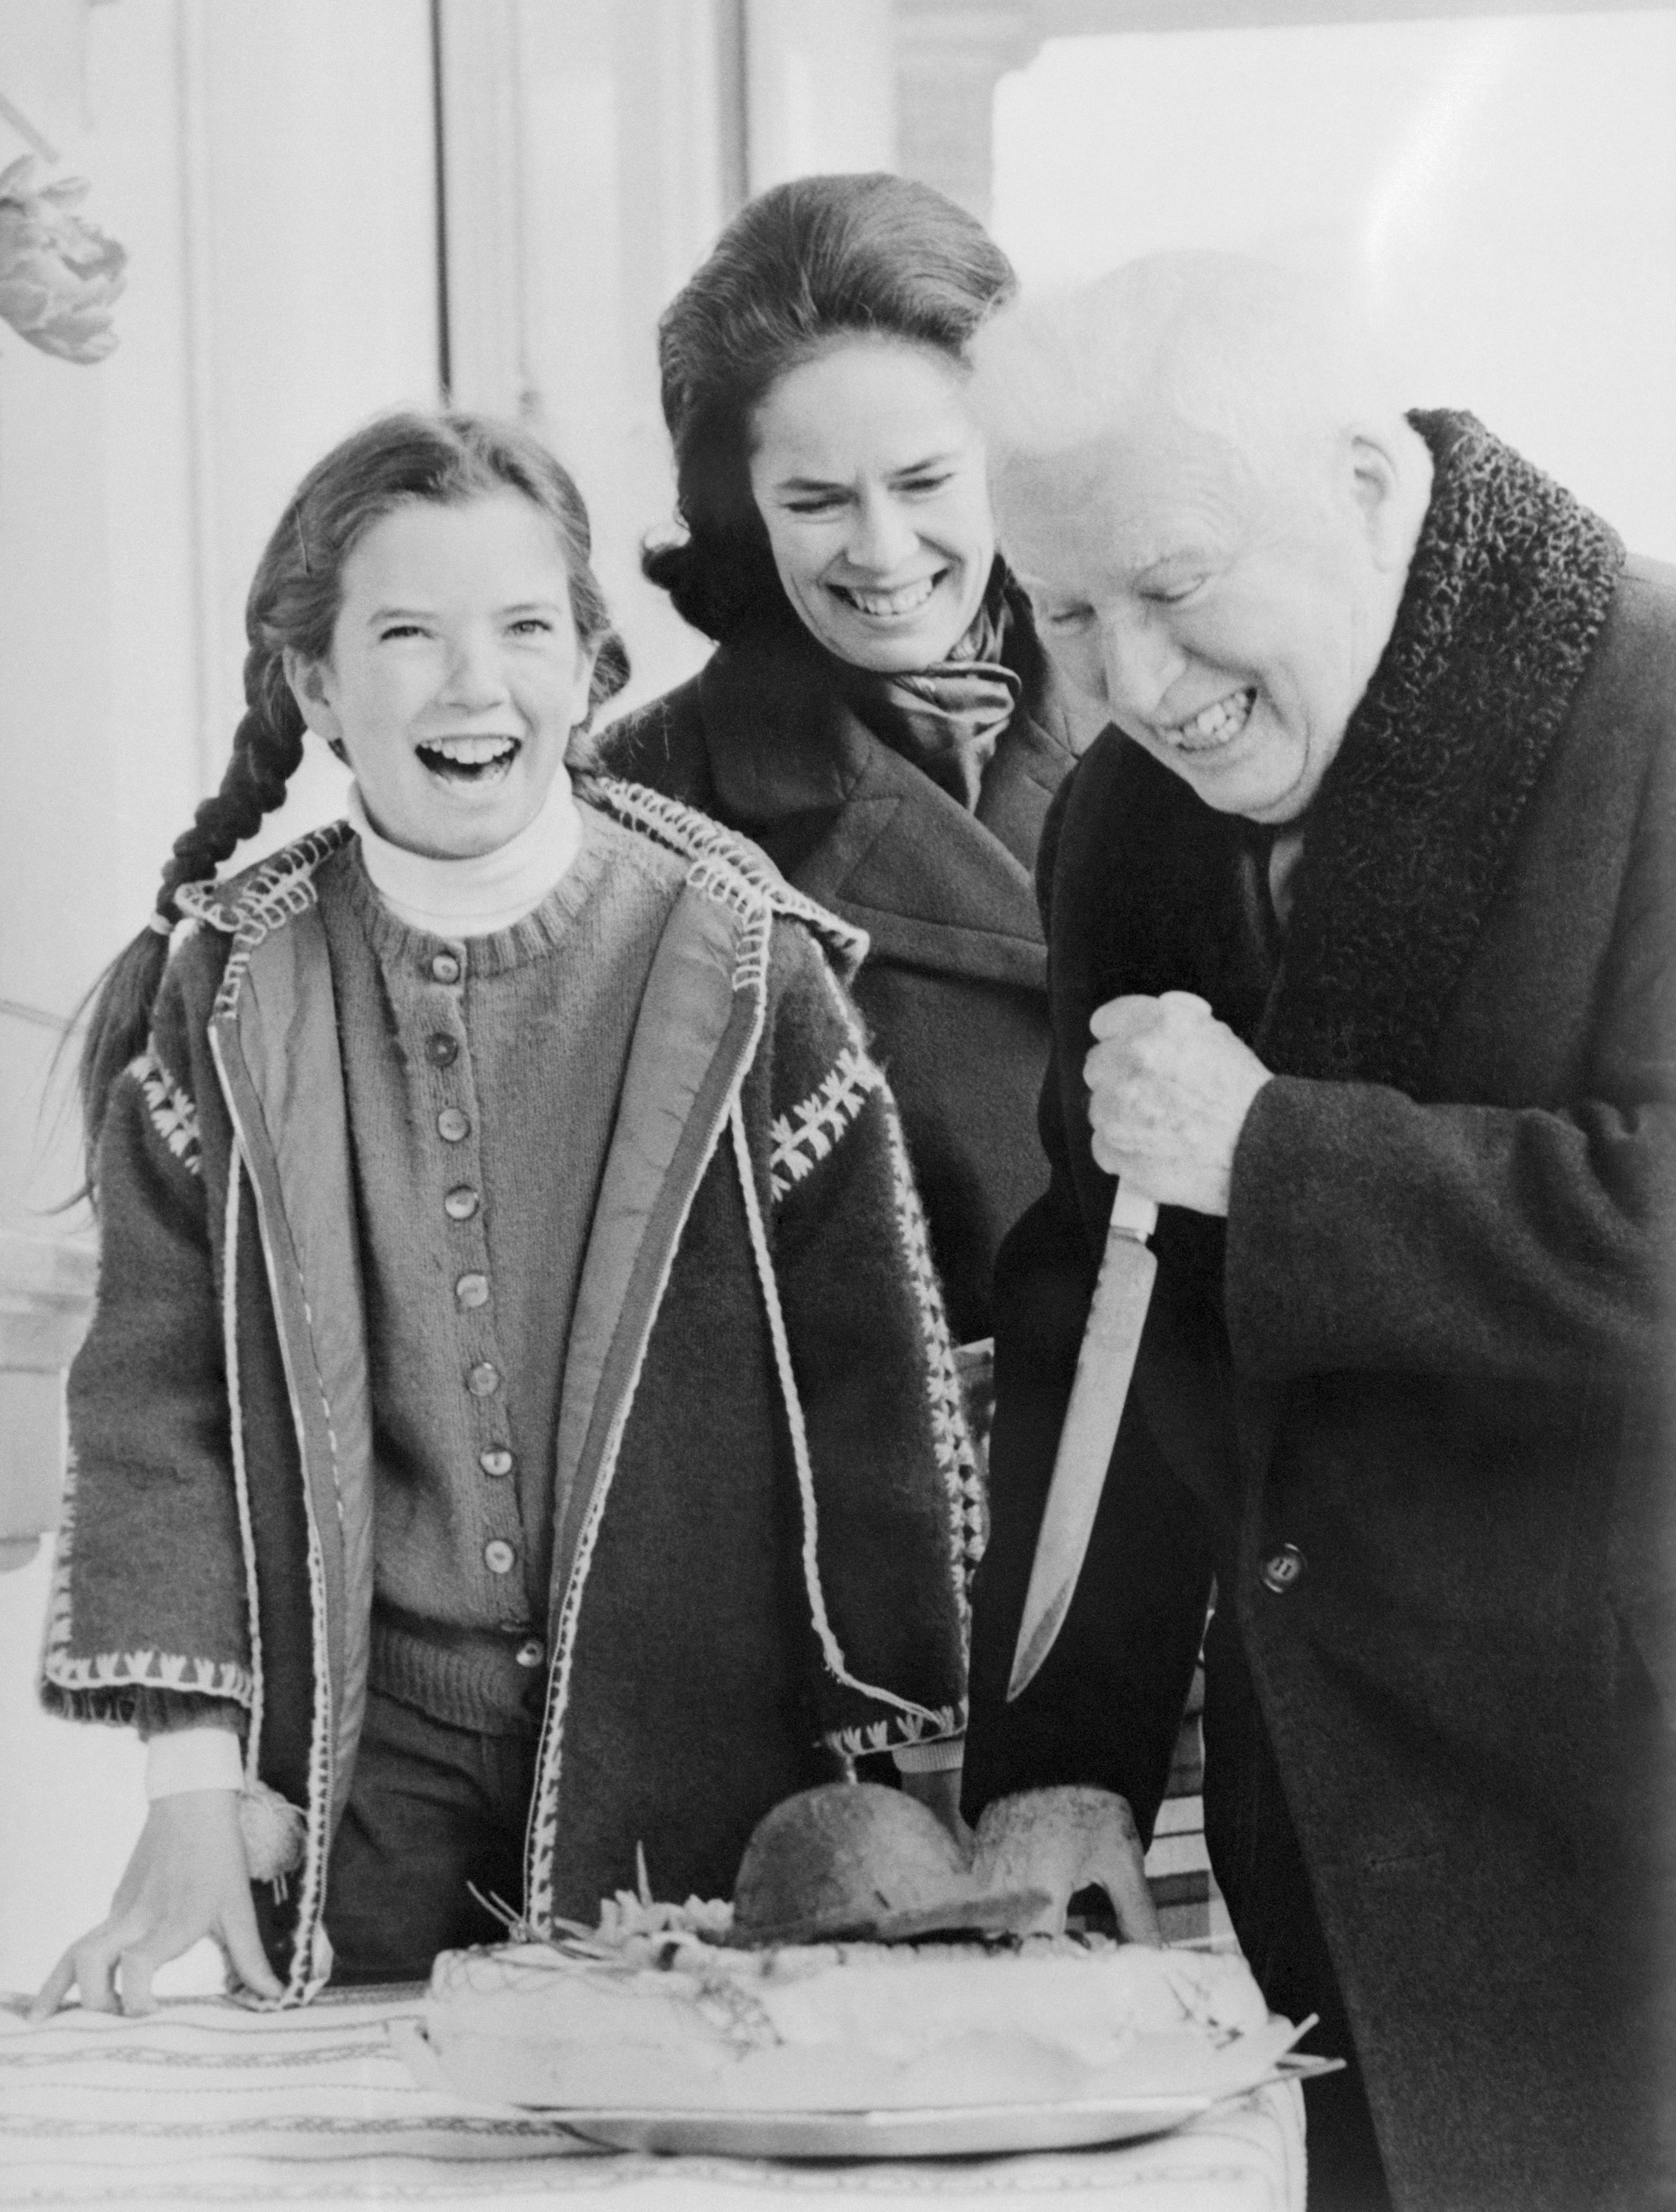 Charles Chaplin gets some help from his wife, Oona, and their daughter, Jane, as he cuts his 80th birthday cake at his home in Vevey, Switzerland, on April 16, 1969. | Source: Getty Images